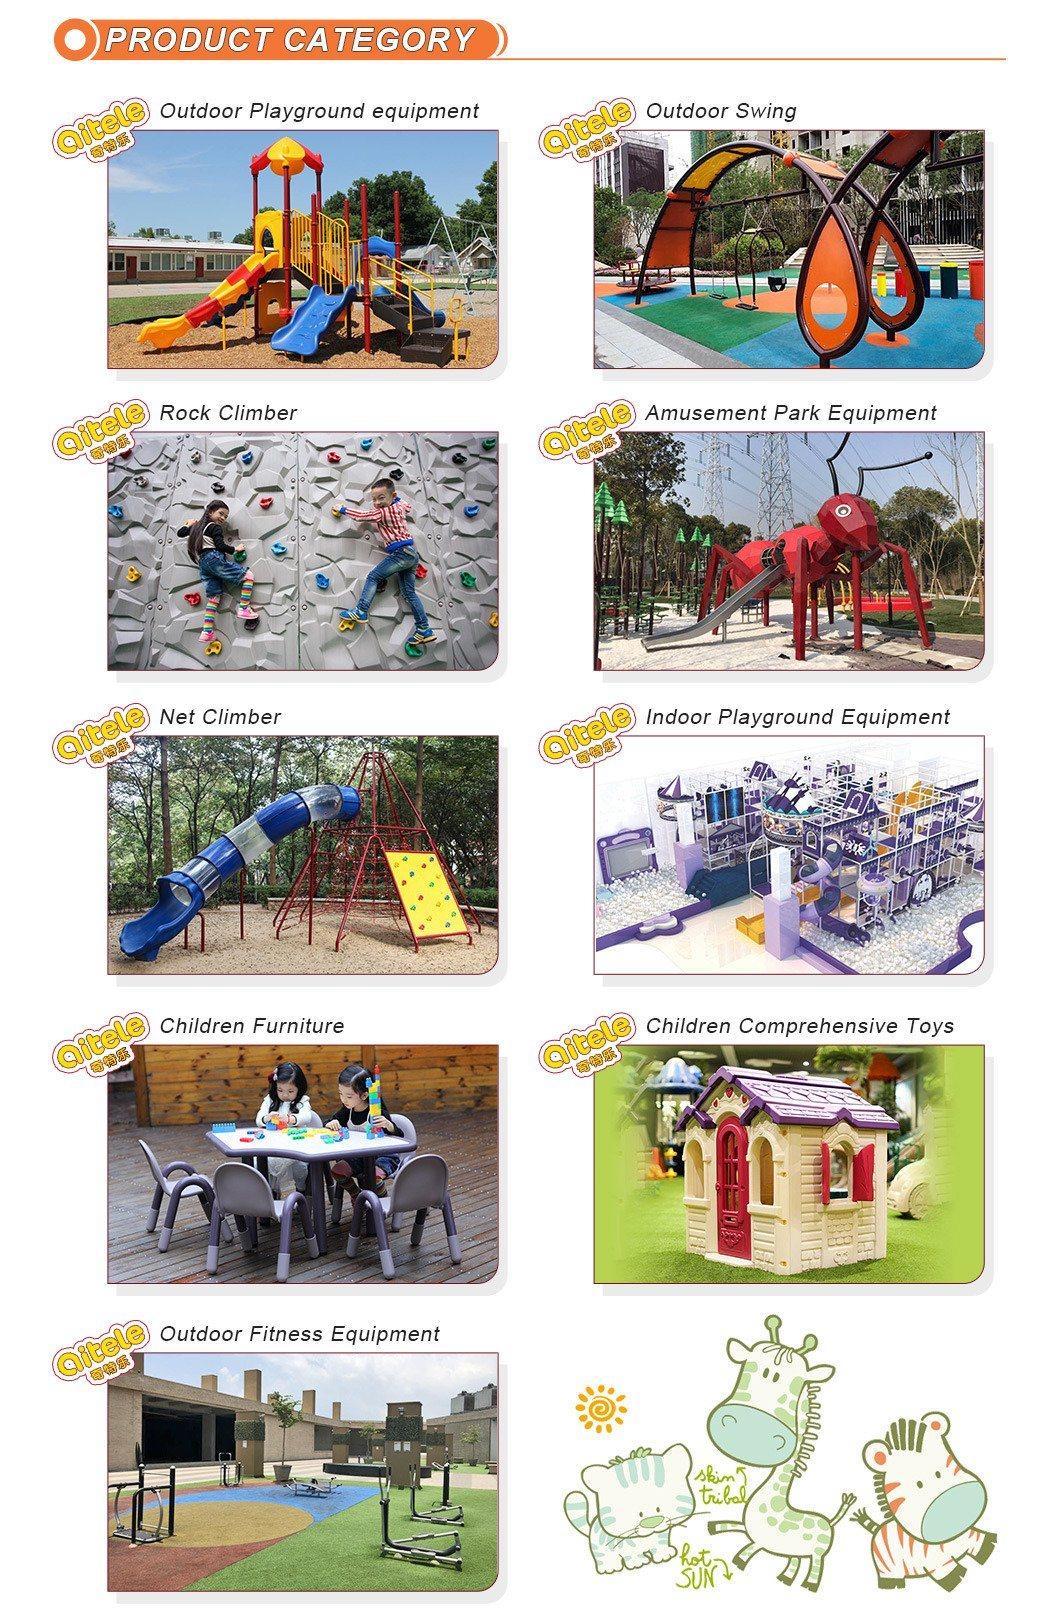 New Style Outdoor Playground Equipment with Plastic Stone